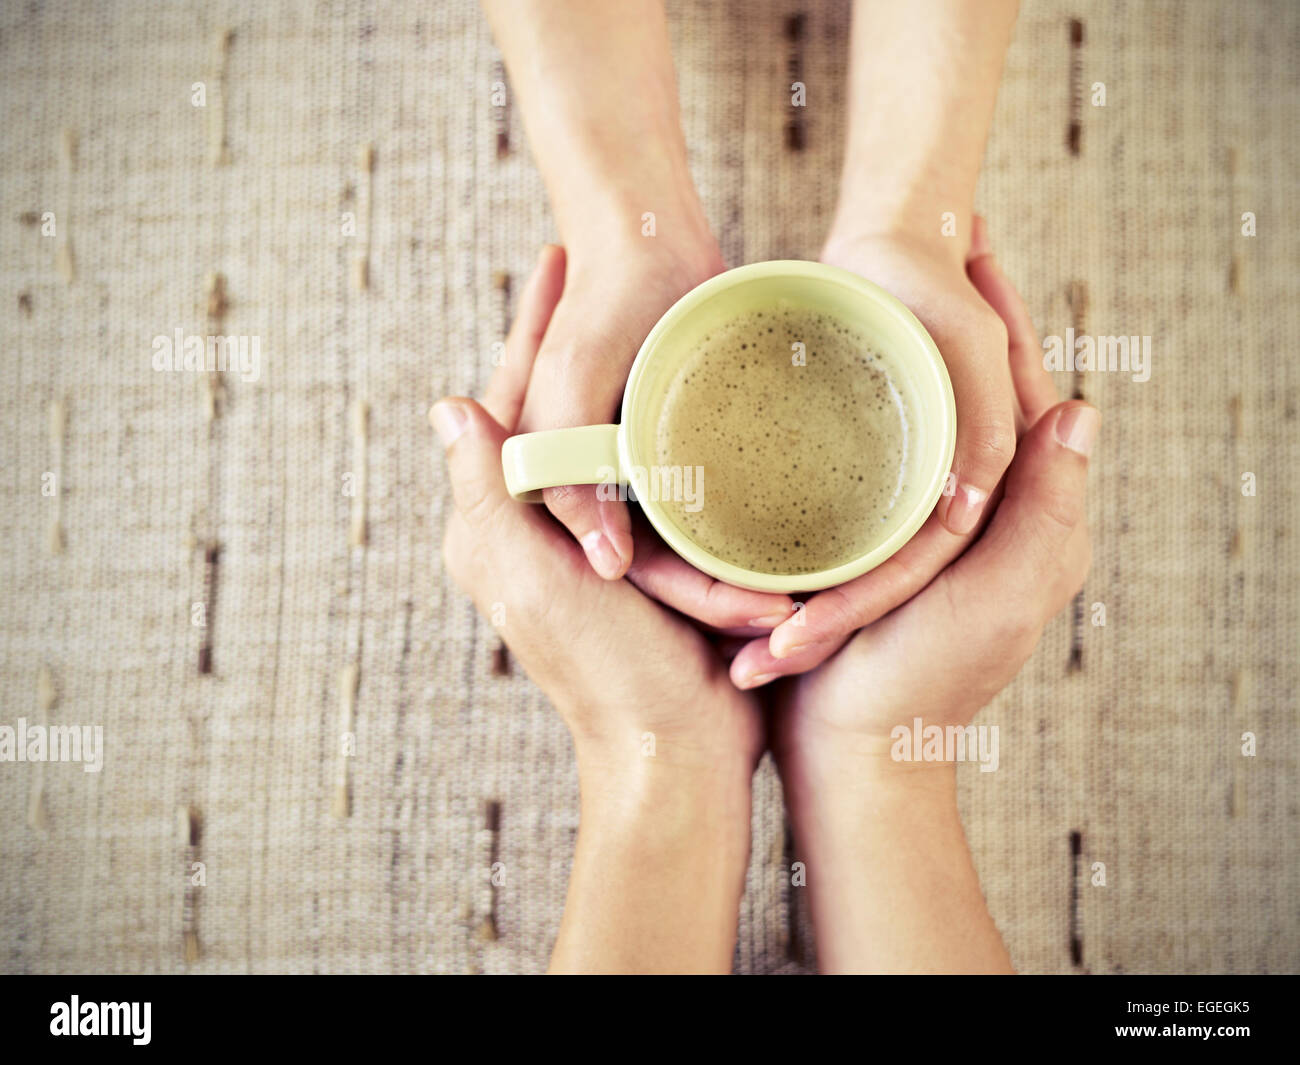 holding hands Stock Photo